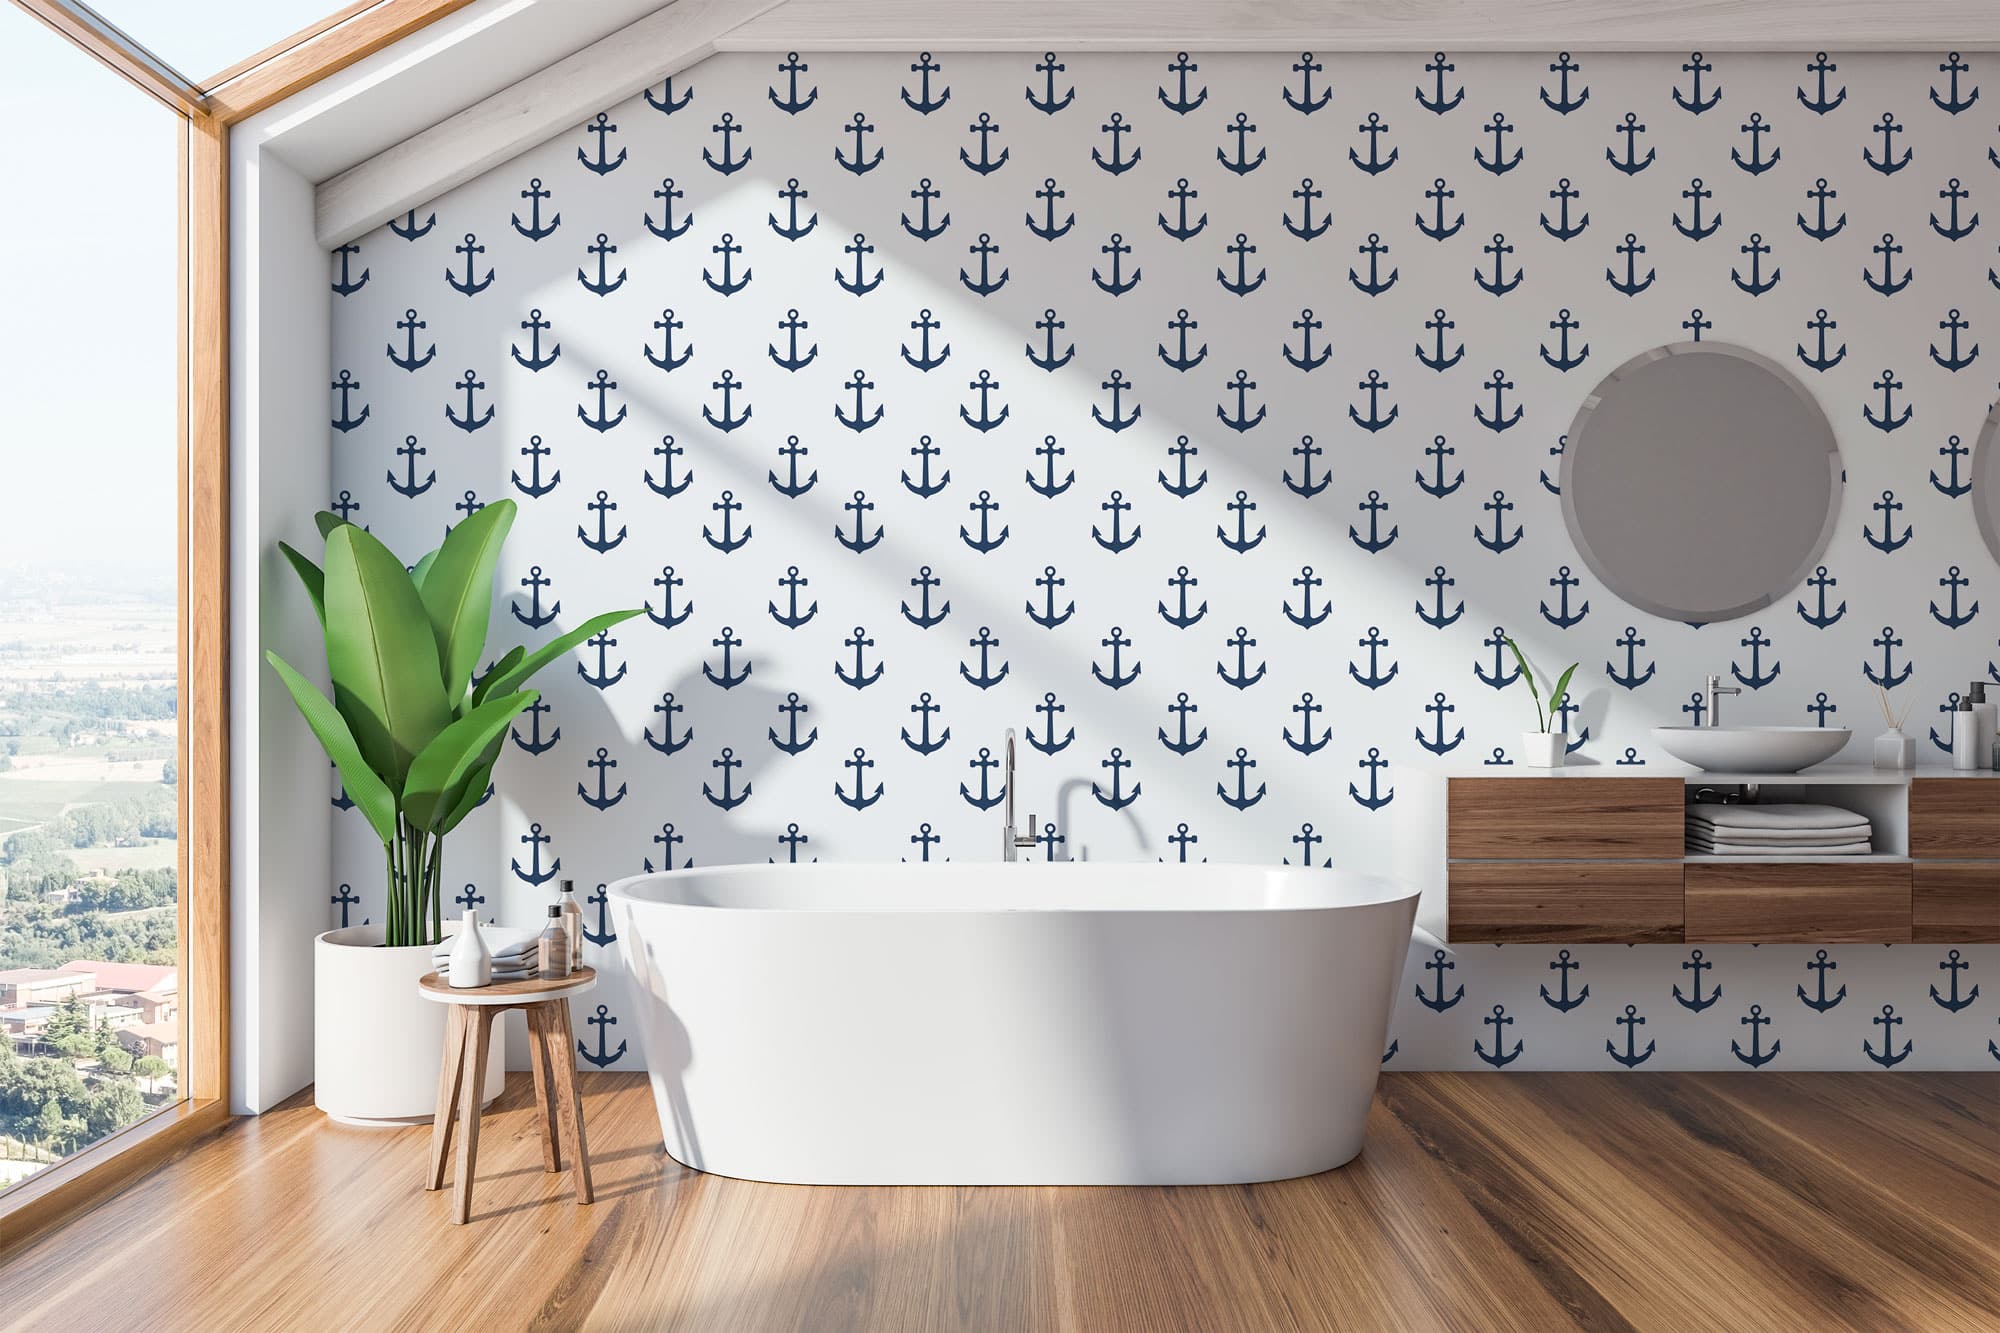 Anchor nautical wallpaper - Peel and Stick or Non-Pasted